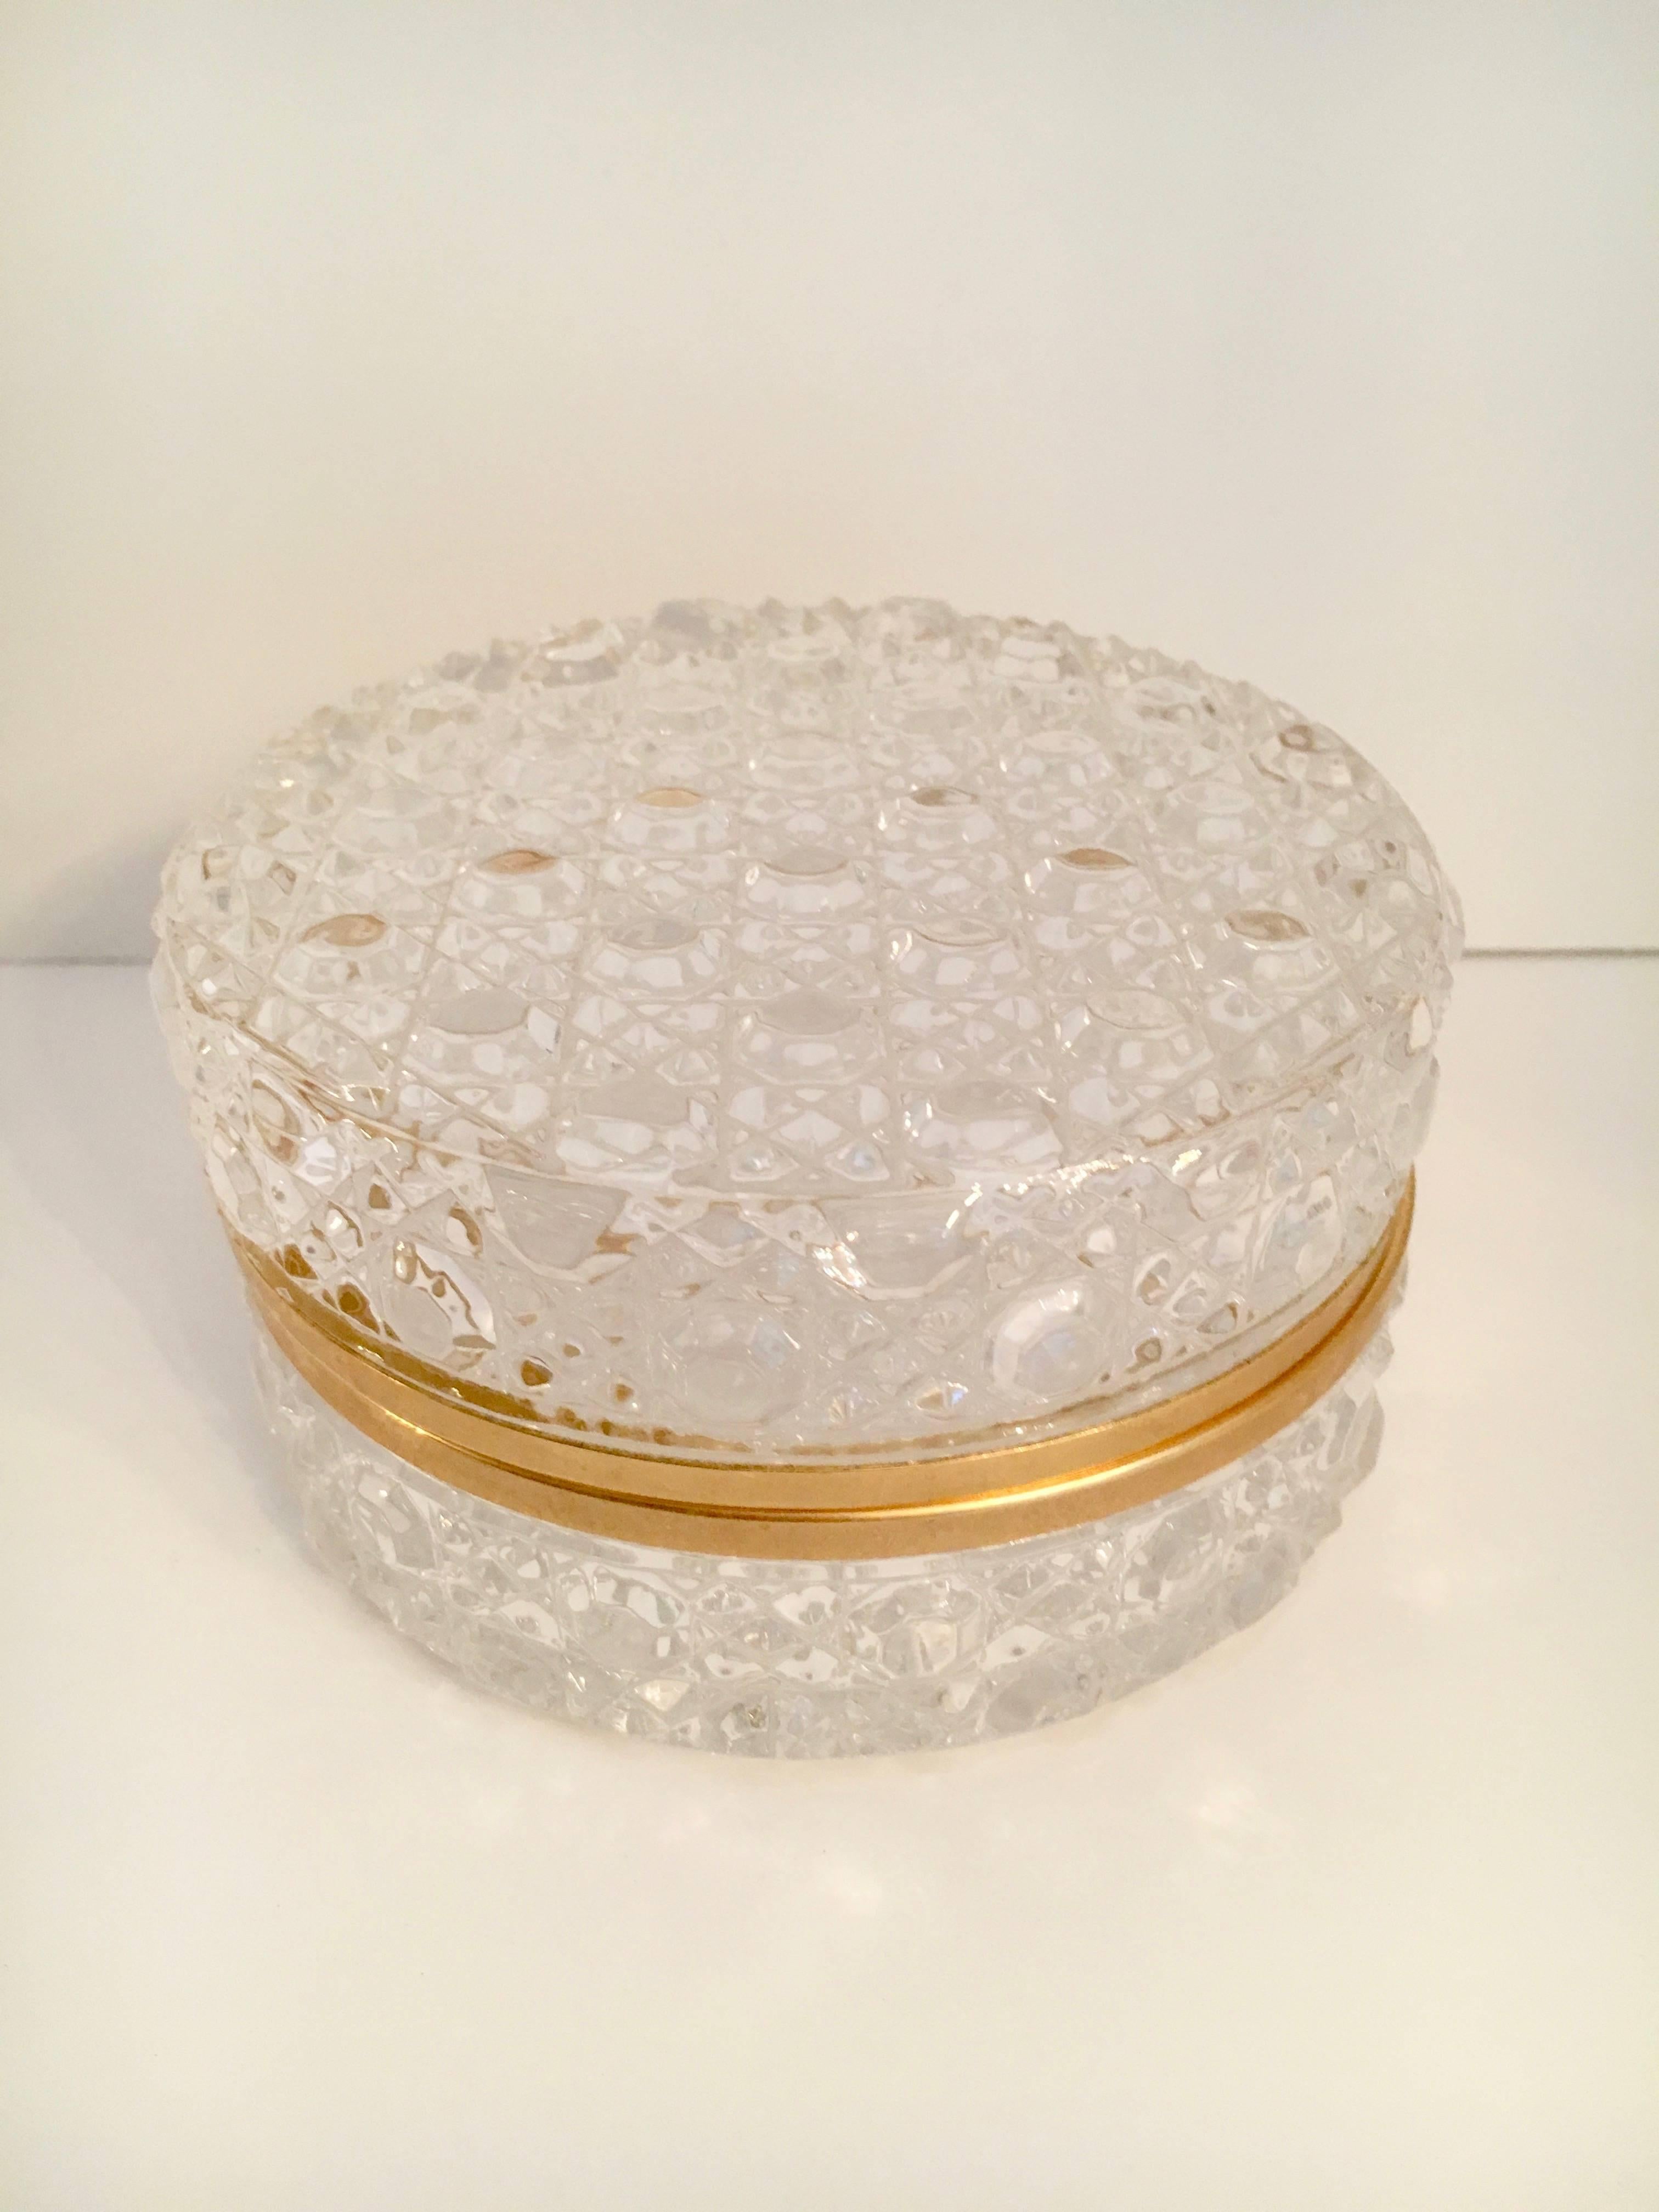 Round glass box with brass detail and closure - beautiful and brilliant box with hexagon pattern details - brass rim and closure. Great for storage or decorative uses. Jewelry to candy.